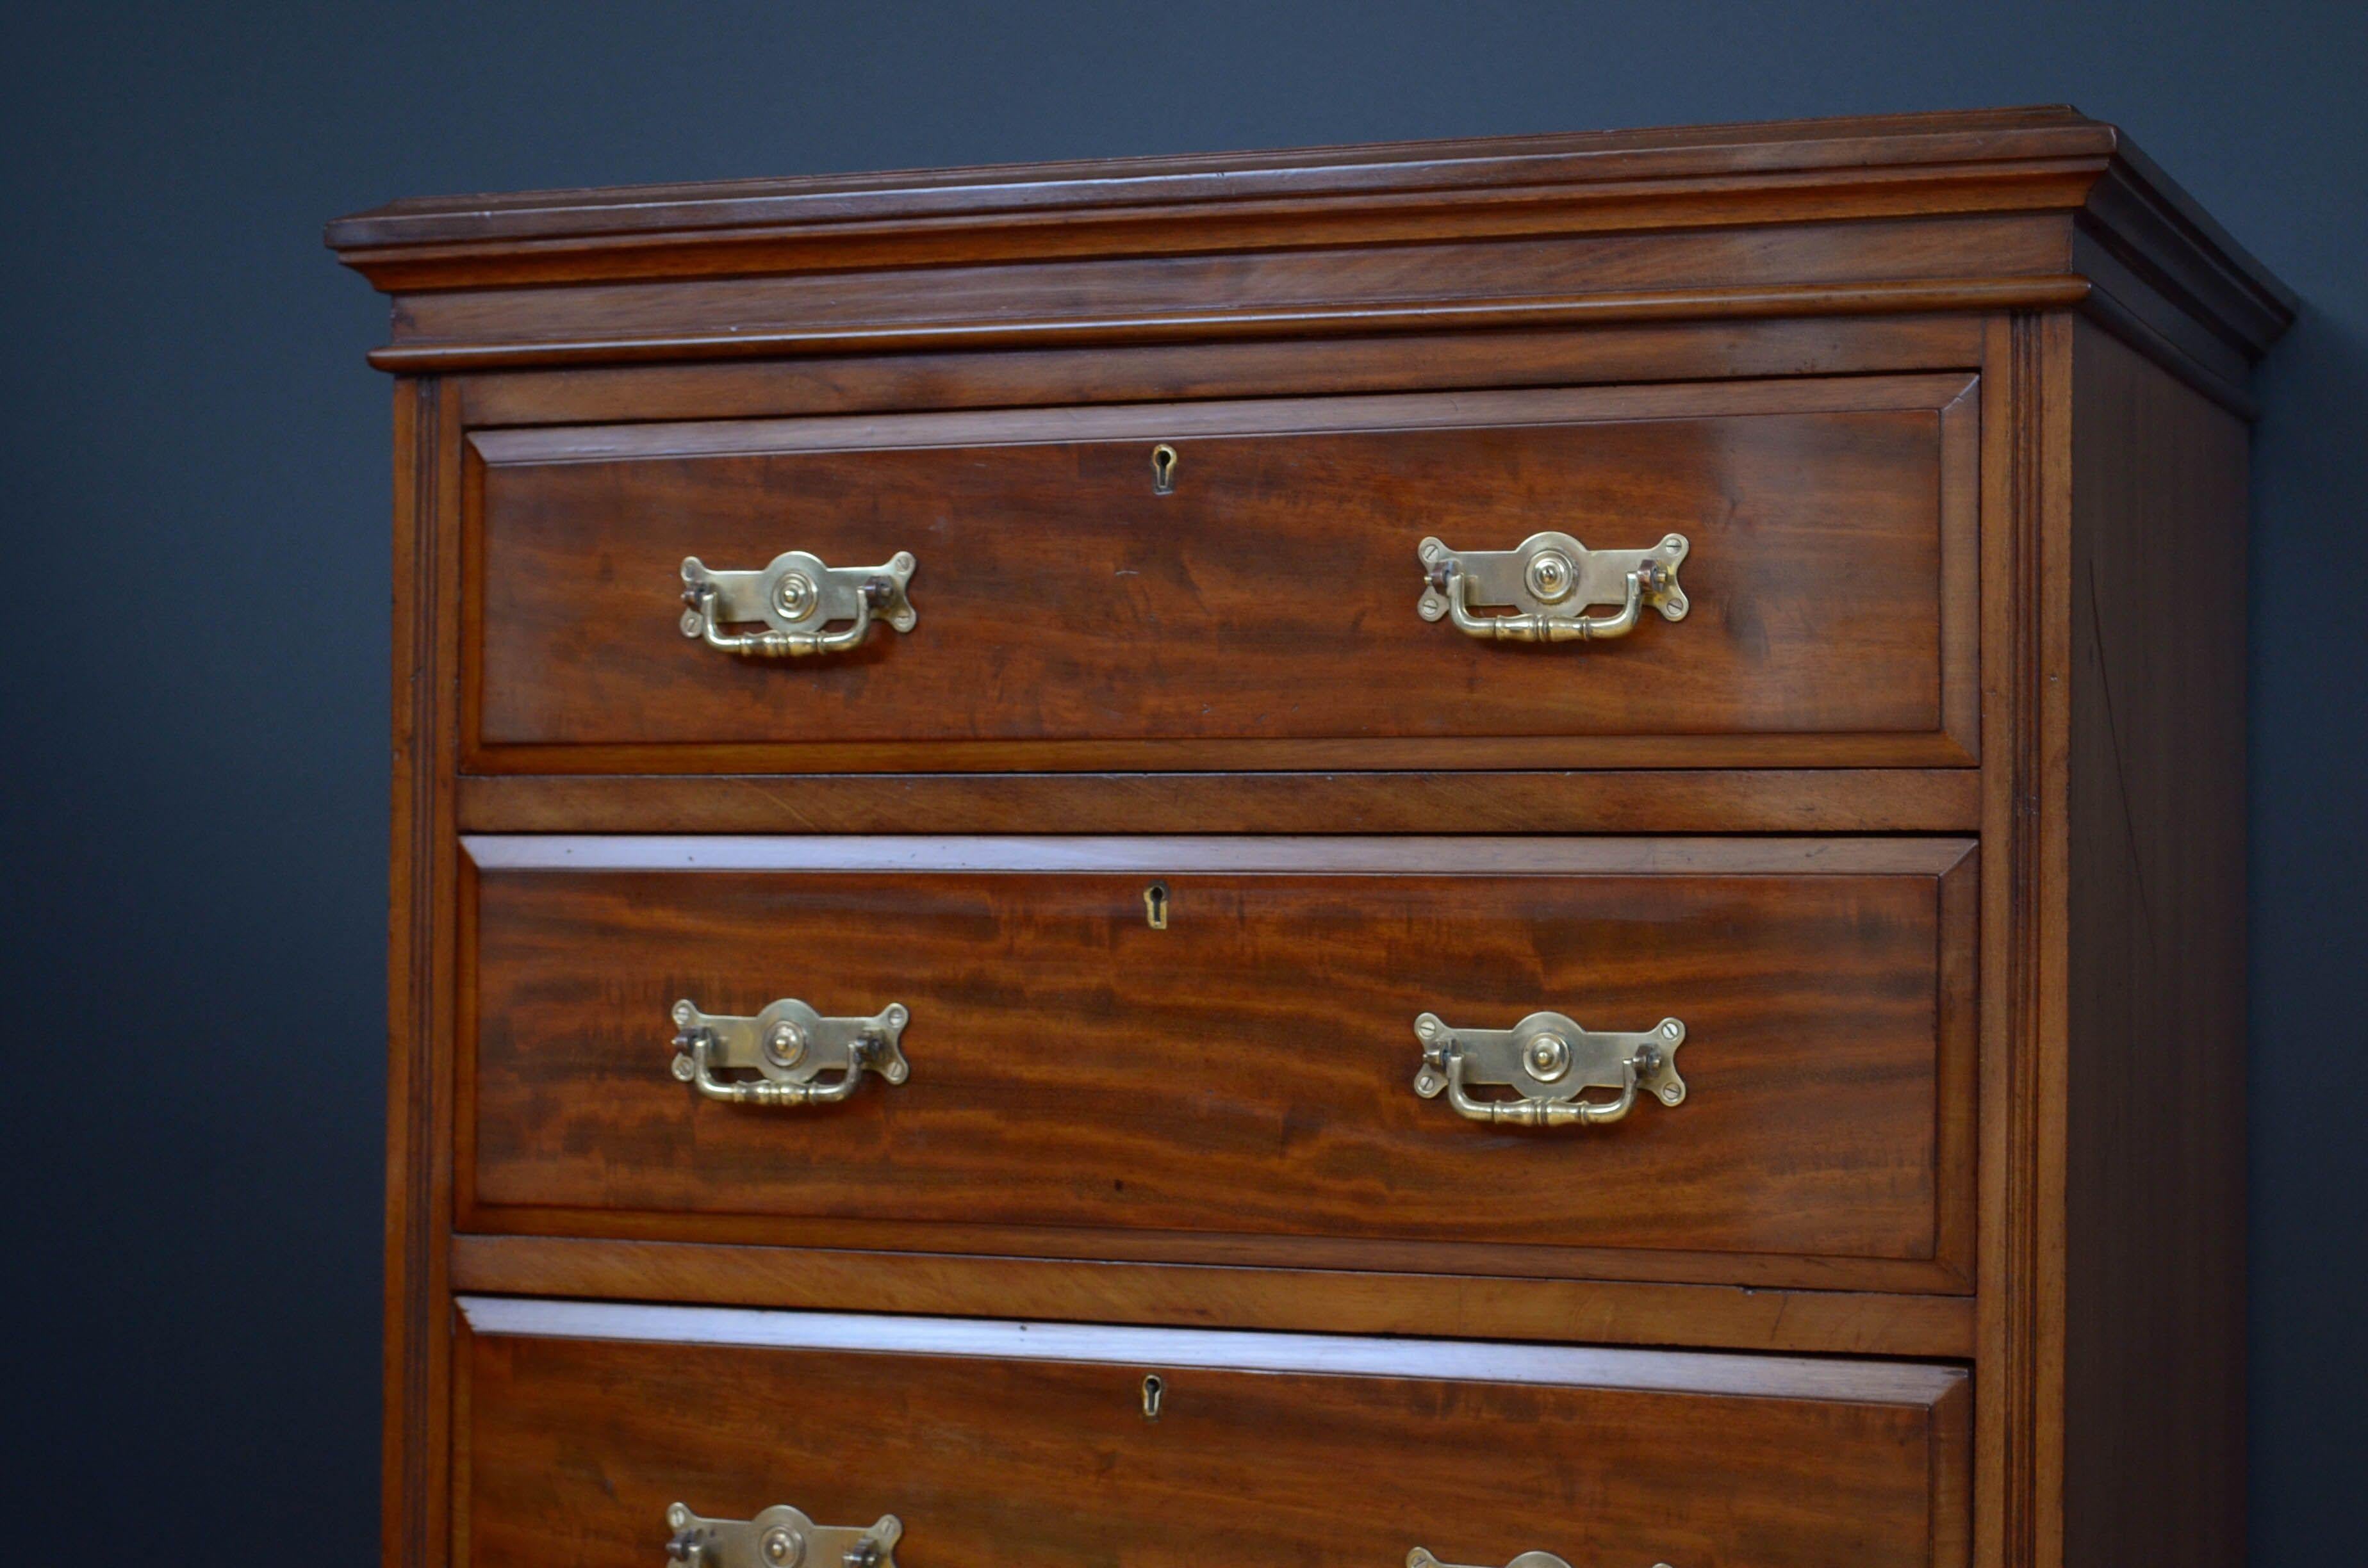 Maples Mahogany Chest of Drawers In Good Condition For Sale In Whaley Bridge, GB